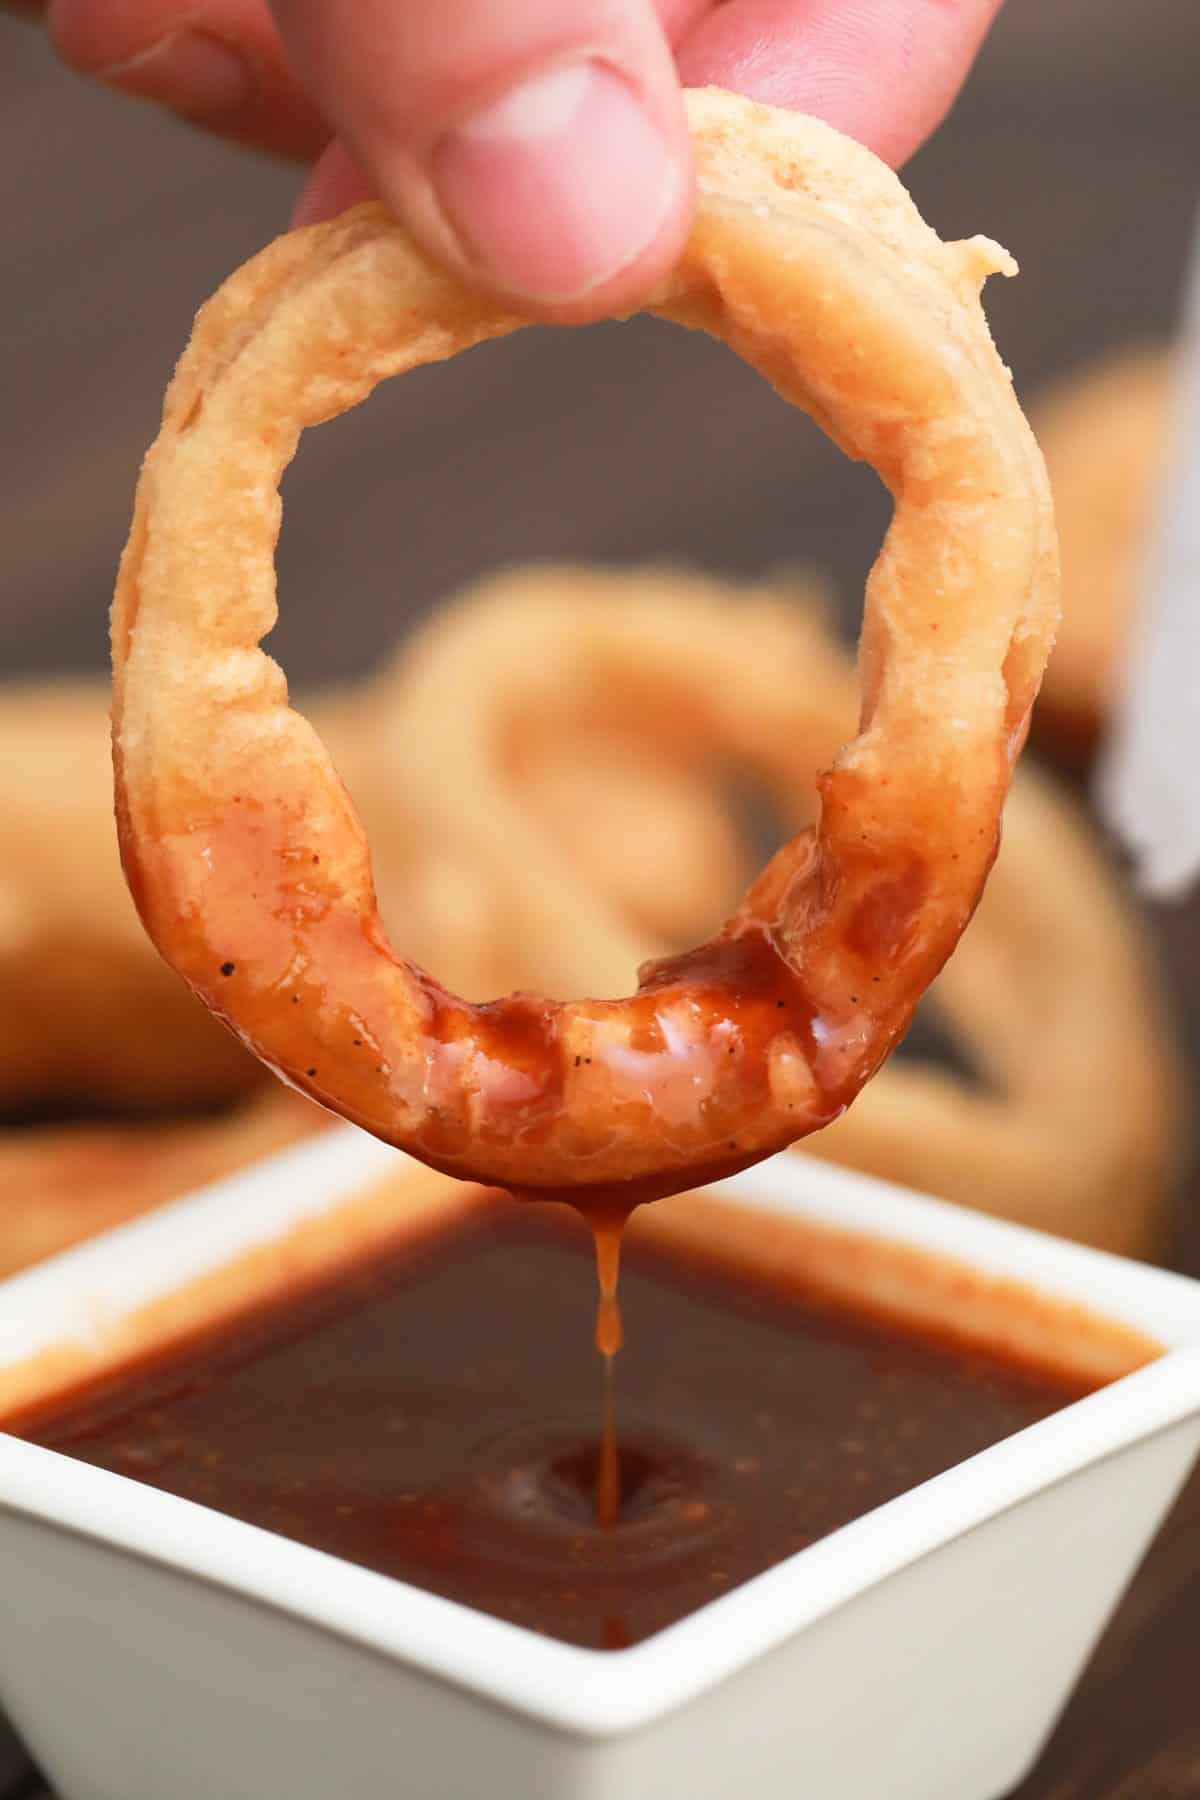 Dipping on onion ring in BBQ sauce